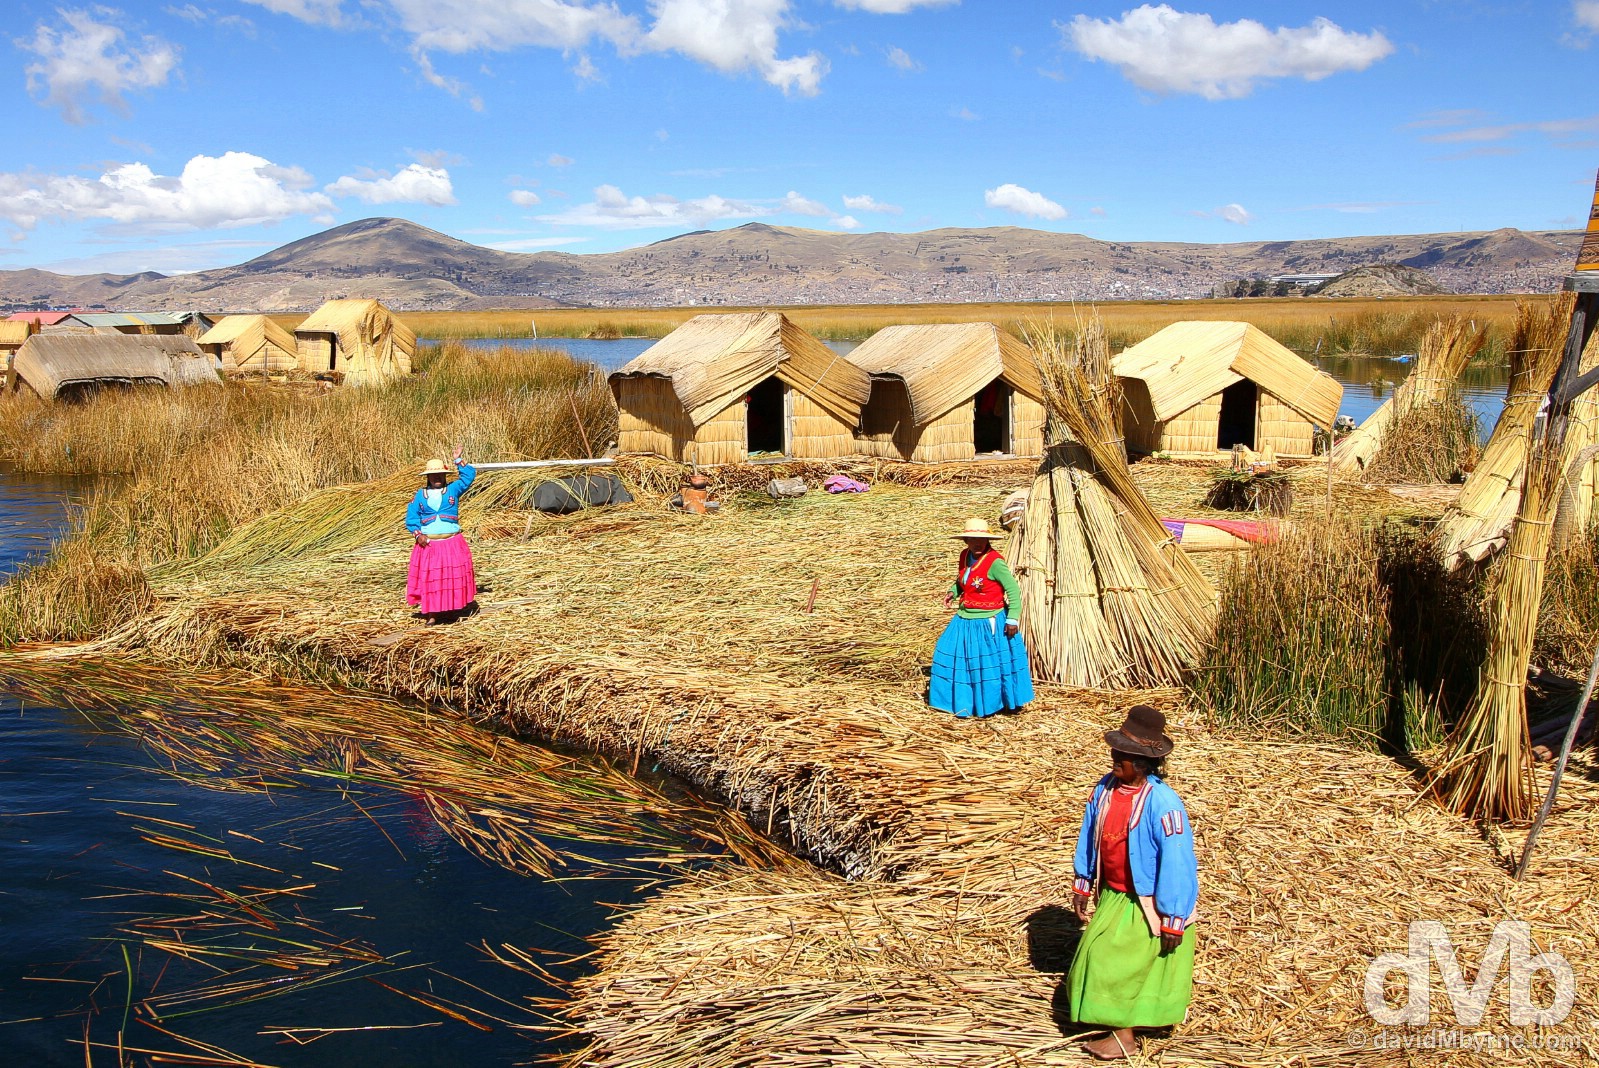 The welcome committee on the floating Uros Islands, Lake Titicaca, Peru. August 19, 2015. 